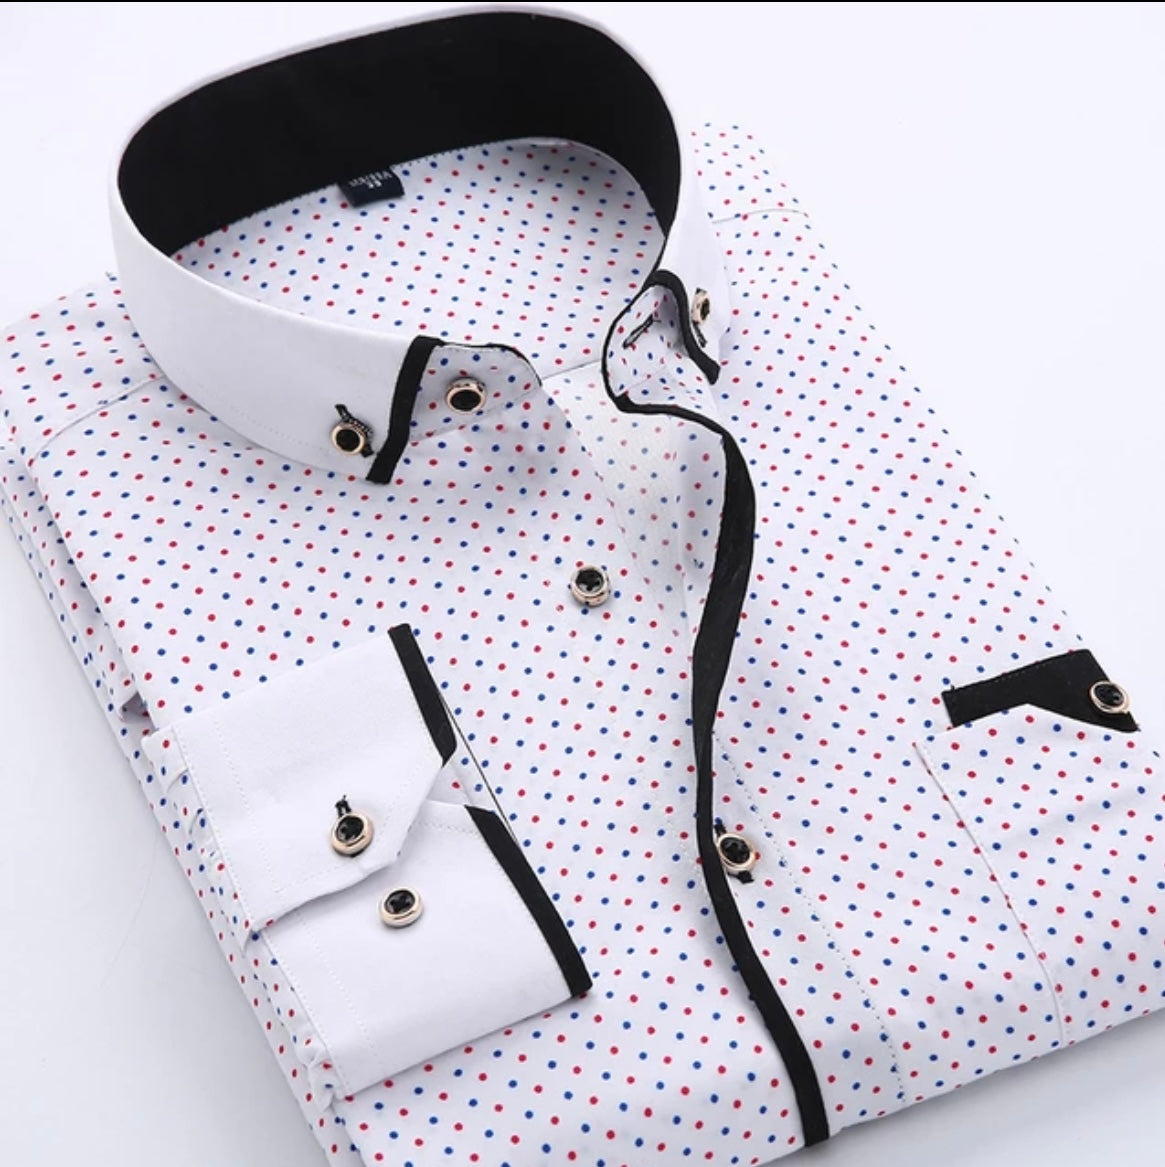 Men’s Button down, Long Sleeved, Floral Shirts - Slim Fit, Light, Comfy; Size - Large; Free Delivery